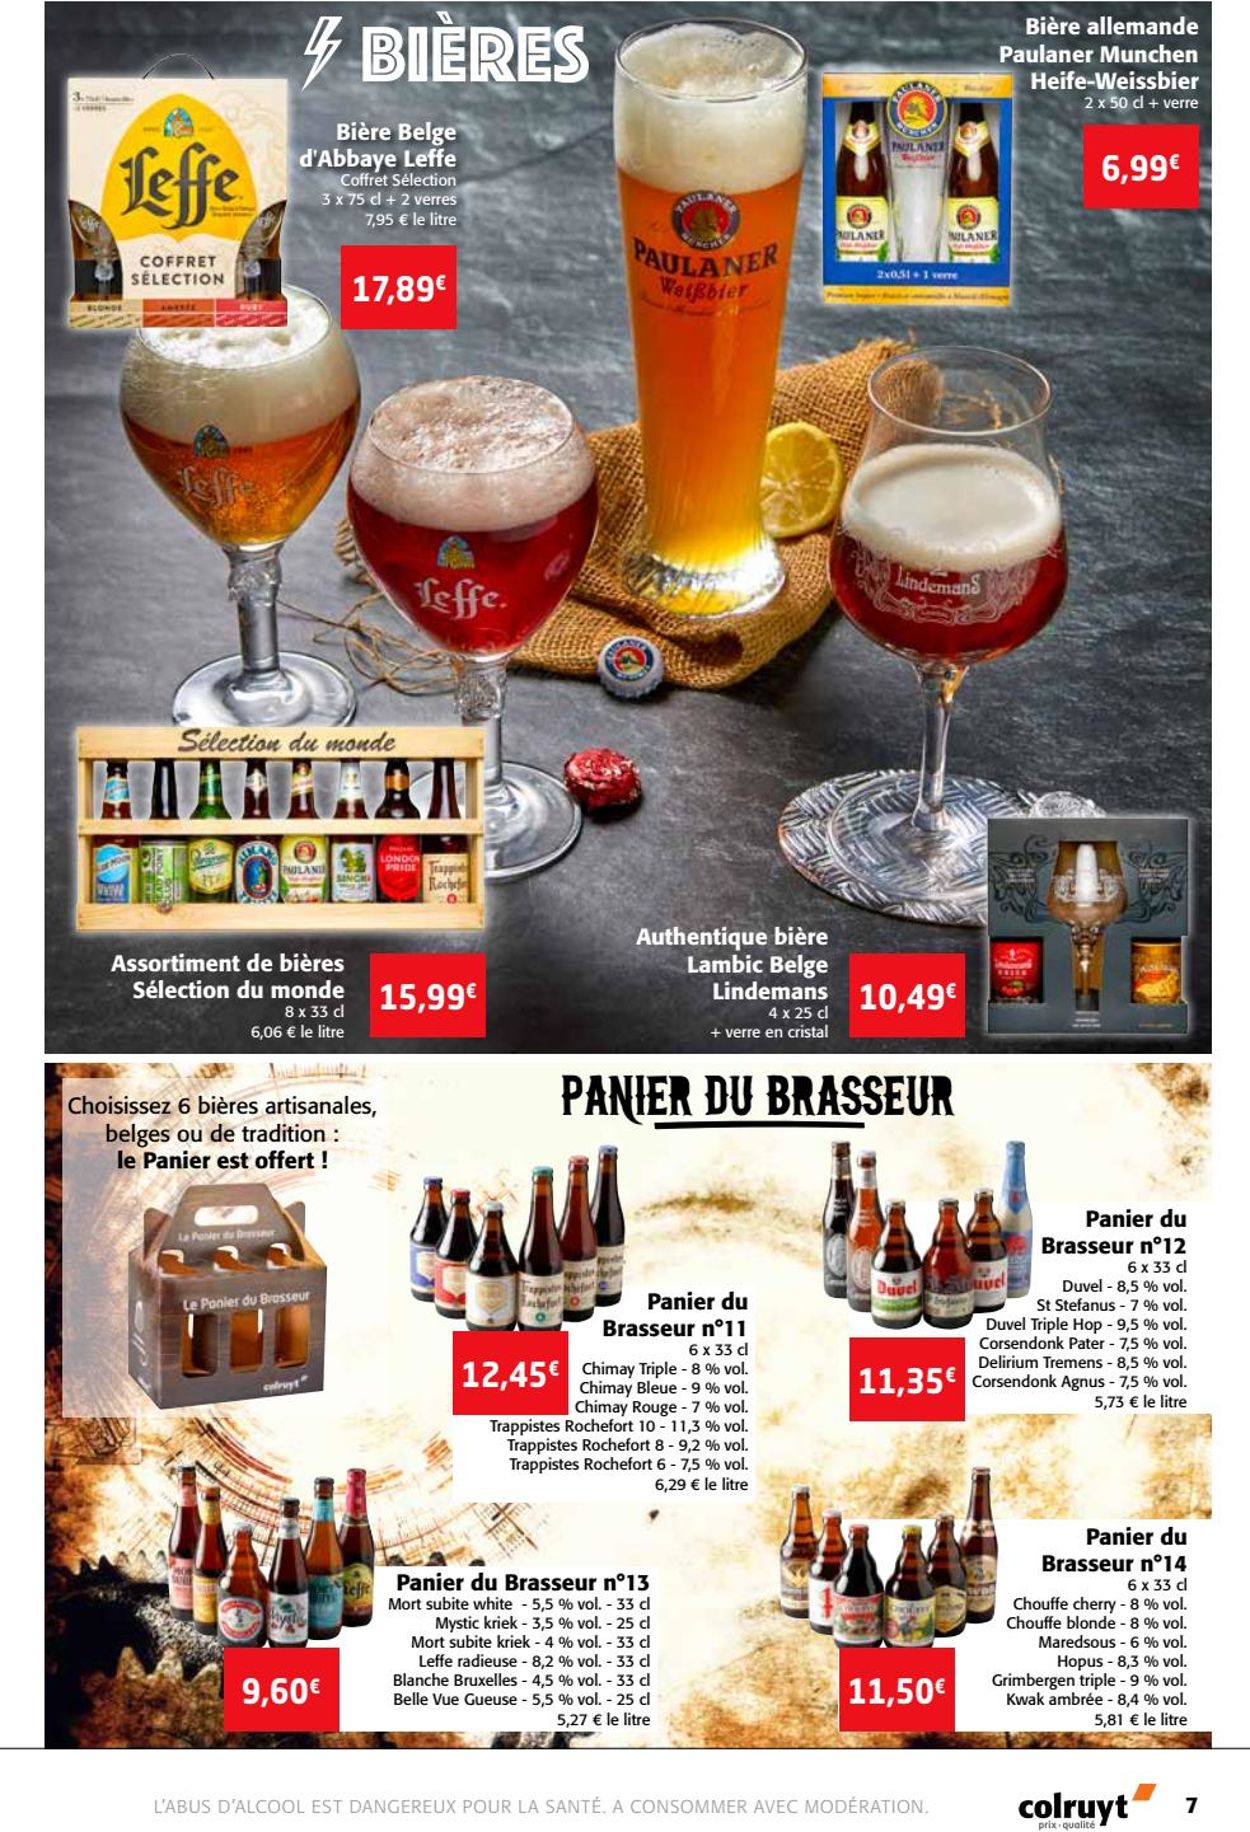 Colruyt Catalogue - 27.11-15.12.2019 (Page 7)